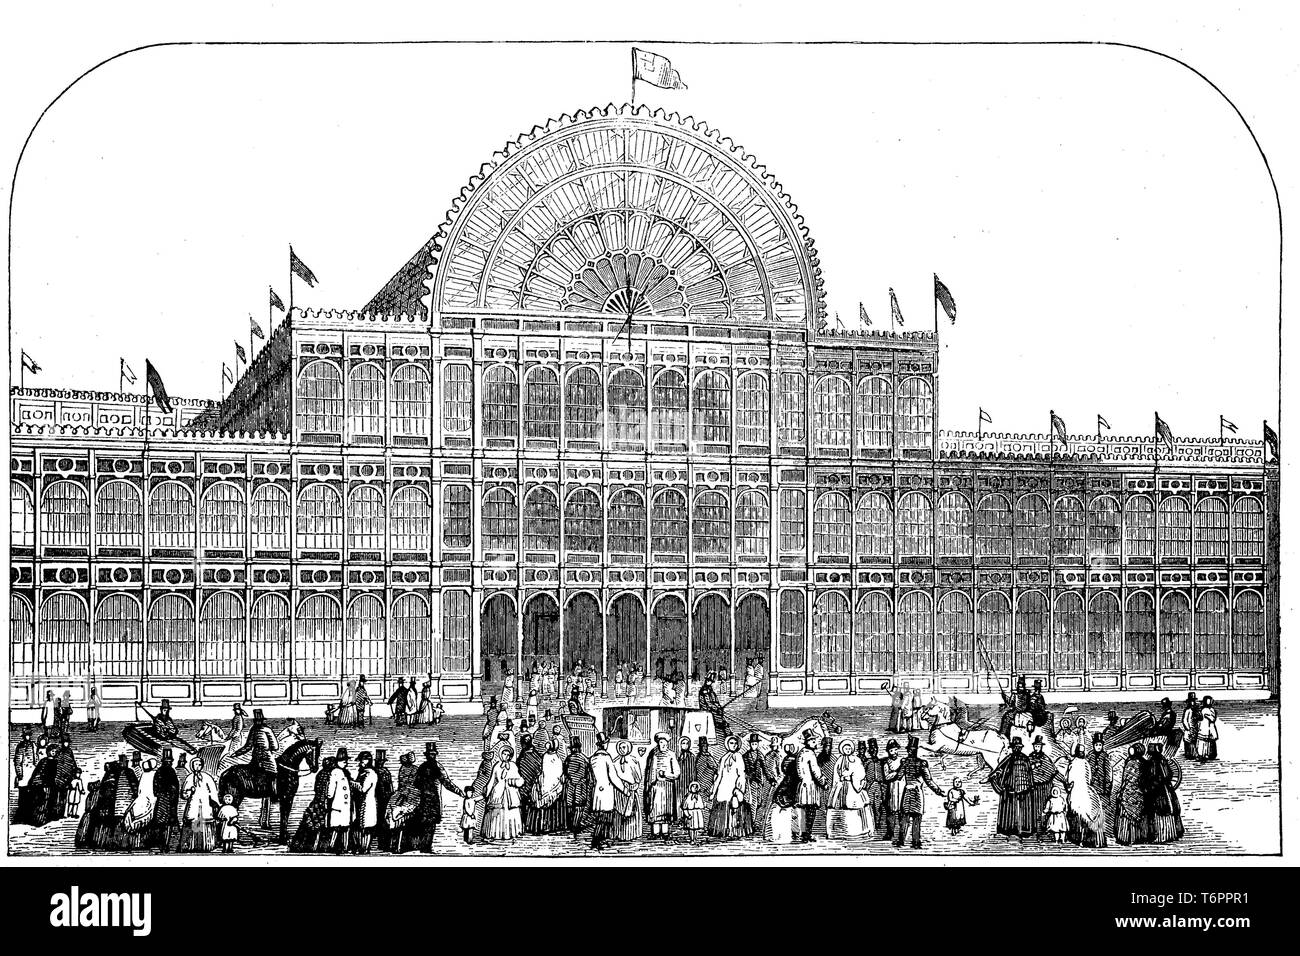 Great Exhibition of the Works of Industry of All Nations or The Great Exhibition, Crystal Palace Exhibition, 1851, London, historical illustration Stock Photo